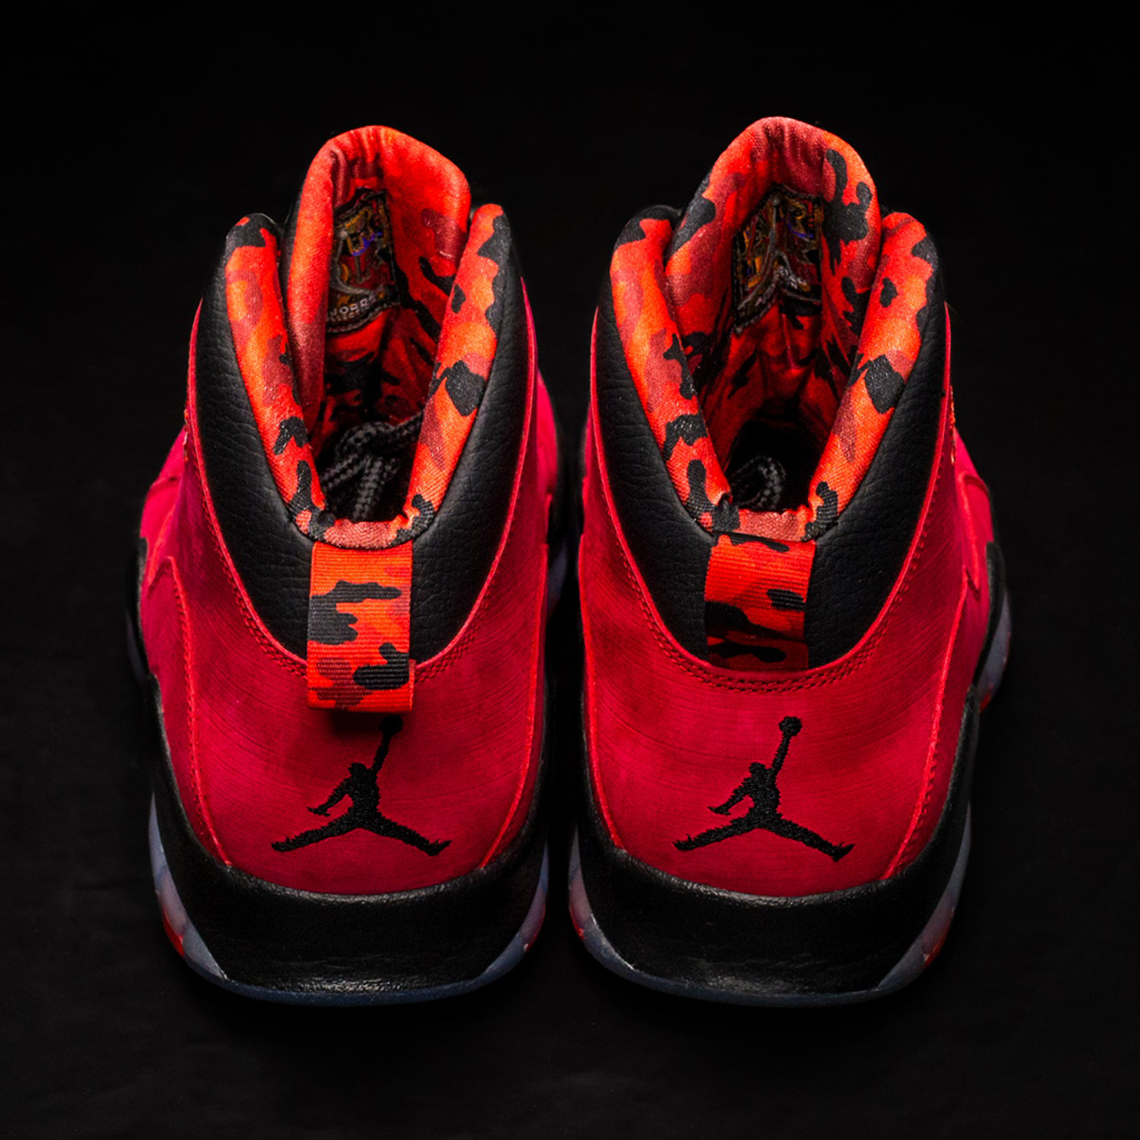 Blake Griffin Check out the Air Jordan VIII 8 3 Peat sample below and head over to Pe 7